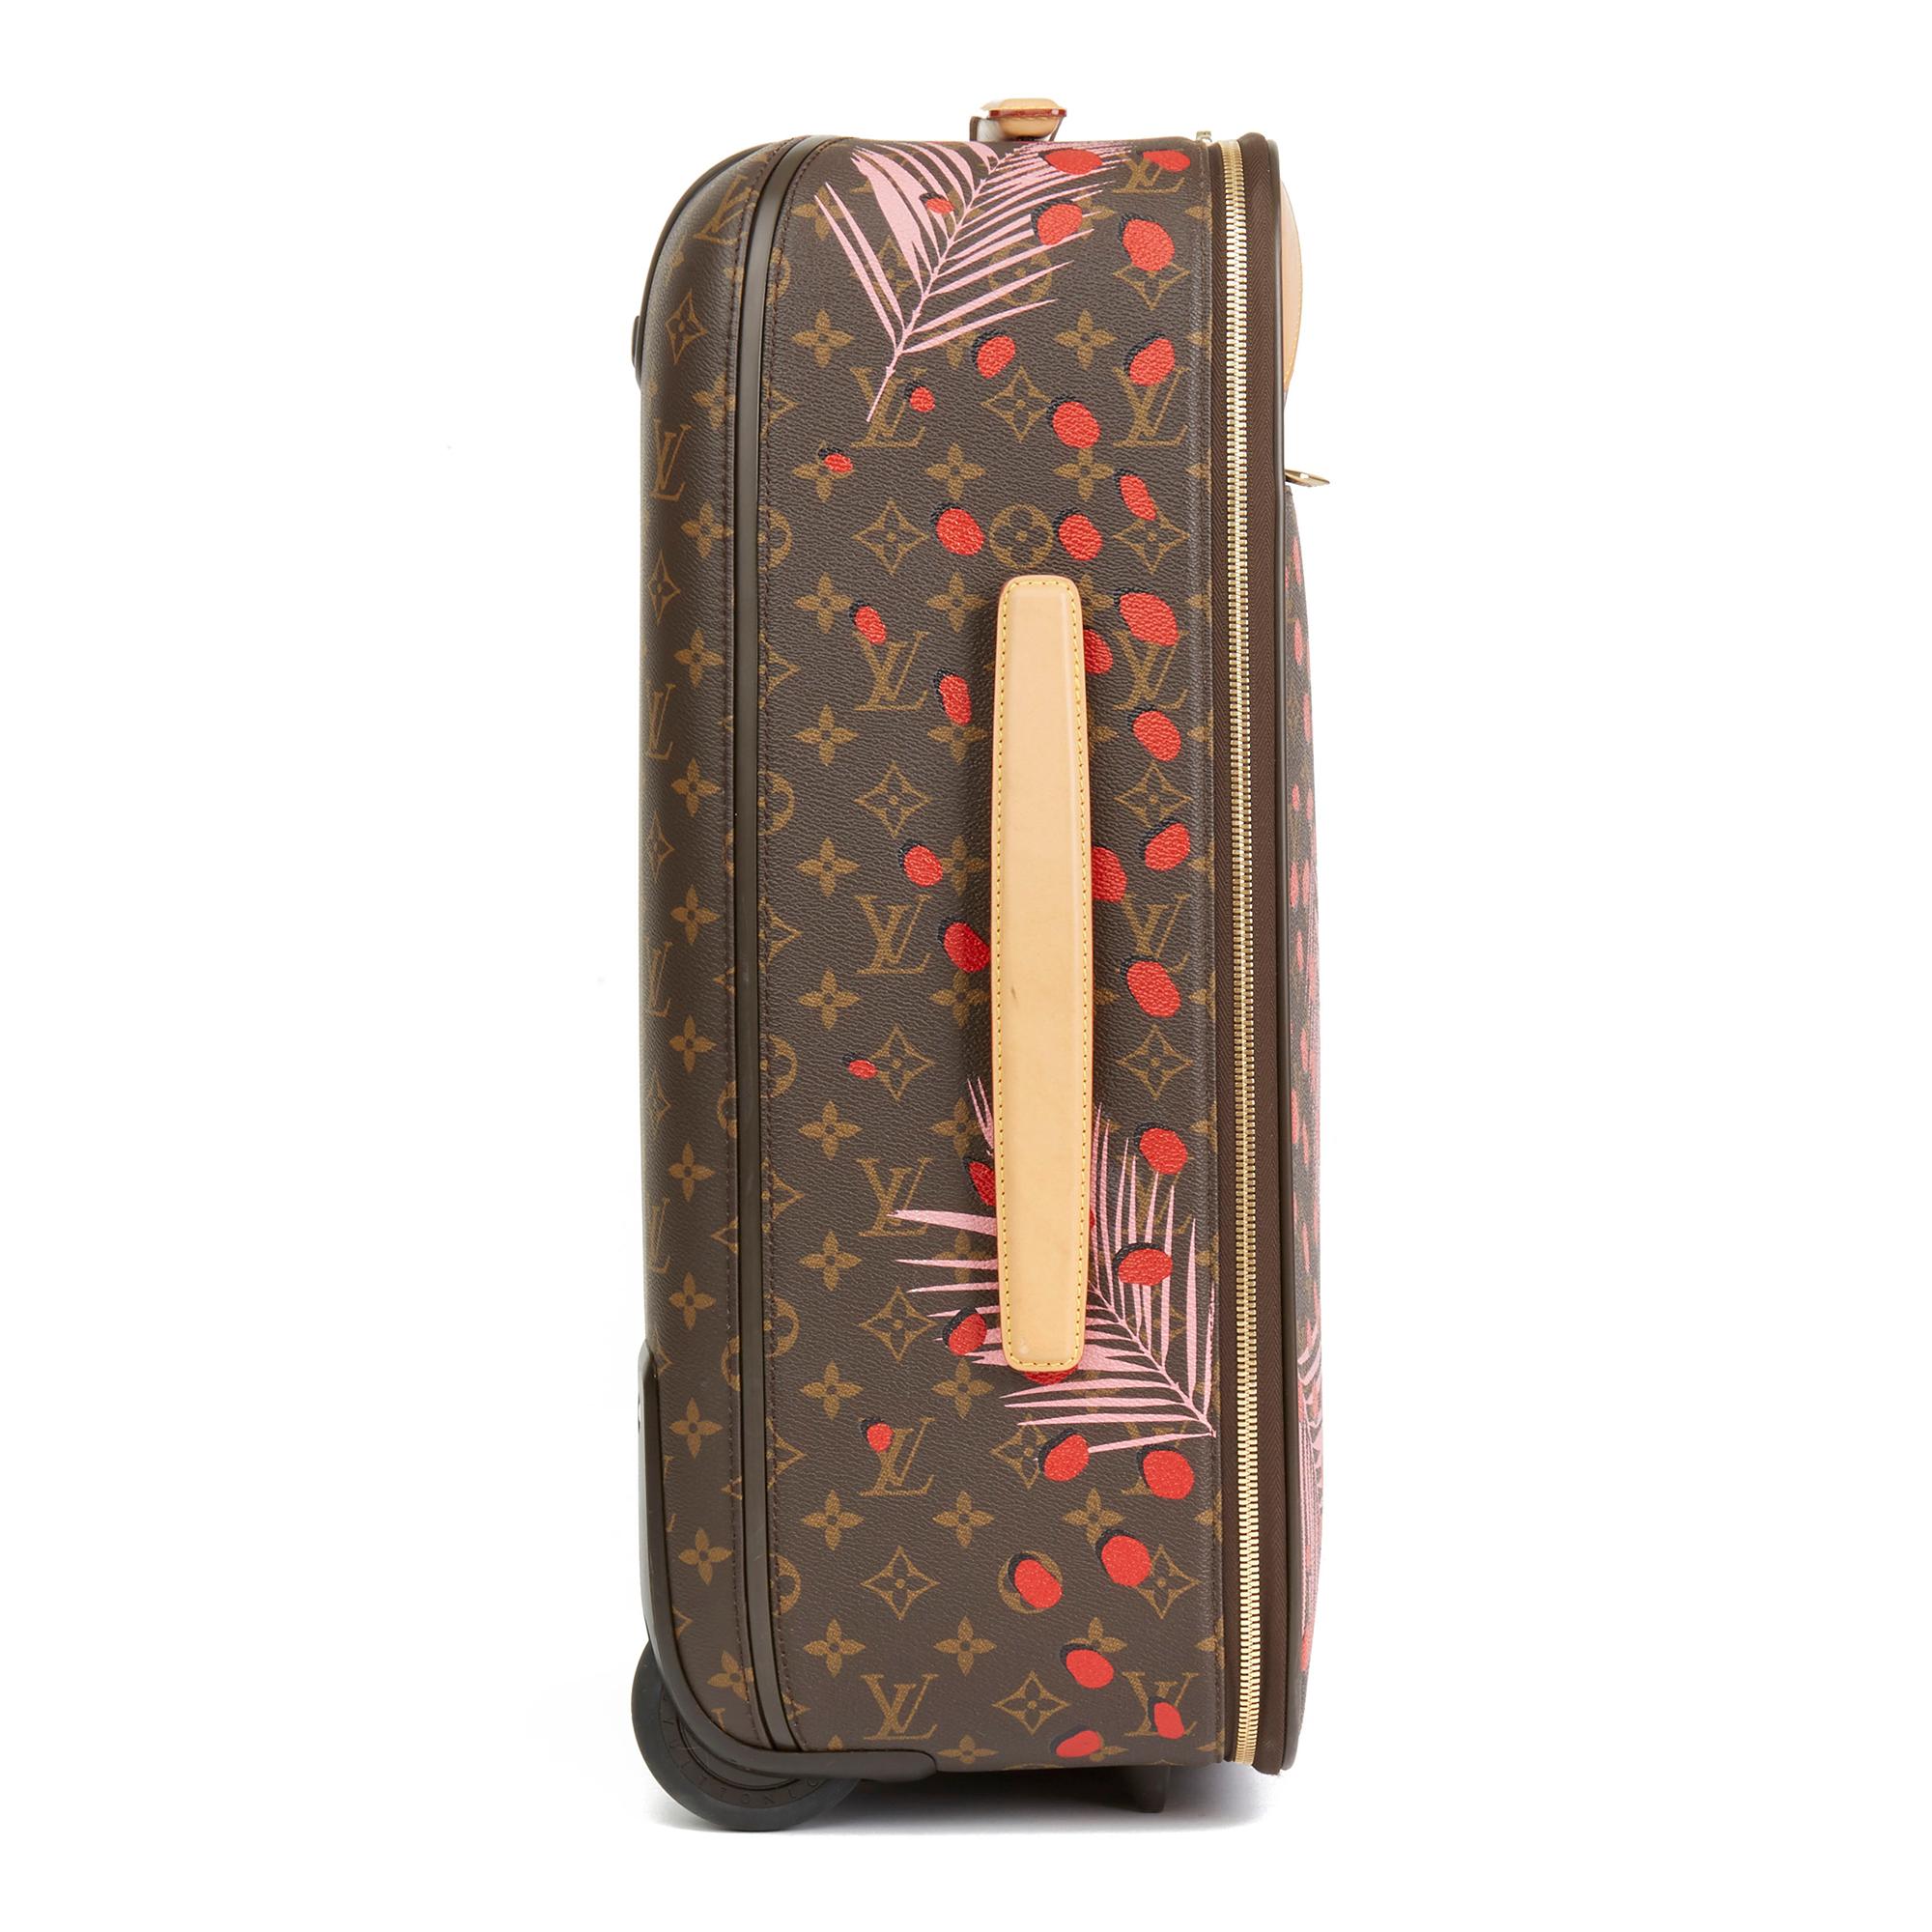 LOUIS VUITTON
Brown Monogram Sugar Pink Poppy Jungle Coated Canvas Pégase Légère 55

Reference: HB2794
Serial Number: SR1106
Age (Circa): 2016
Accompanied By: Protective Cover
Authenticity Details: Date Stamp (Made in France)
Gender: Ladies
Type: